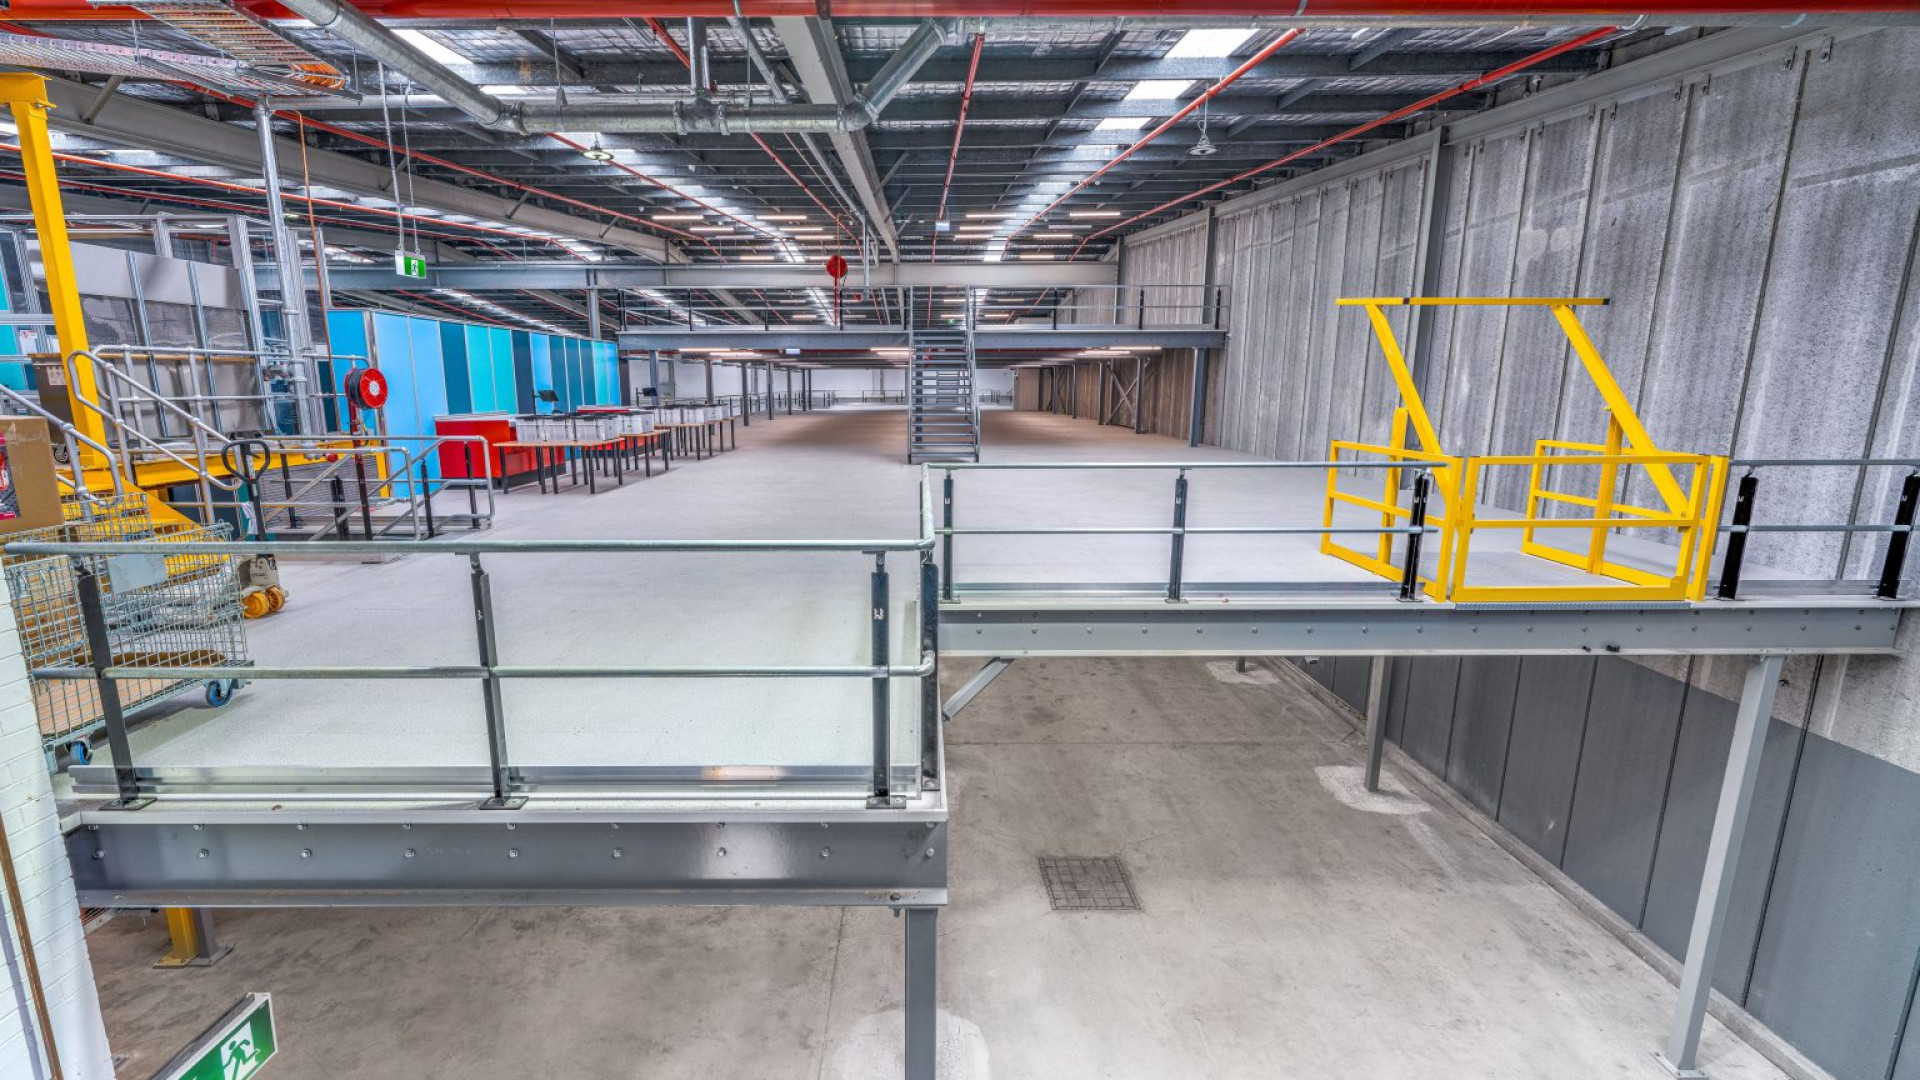 Fire Protection Methods for Warehouse Mezzanines